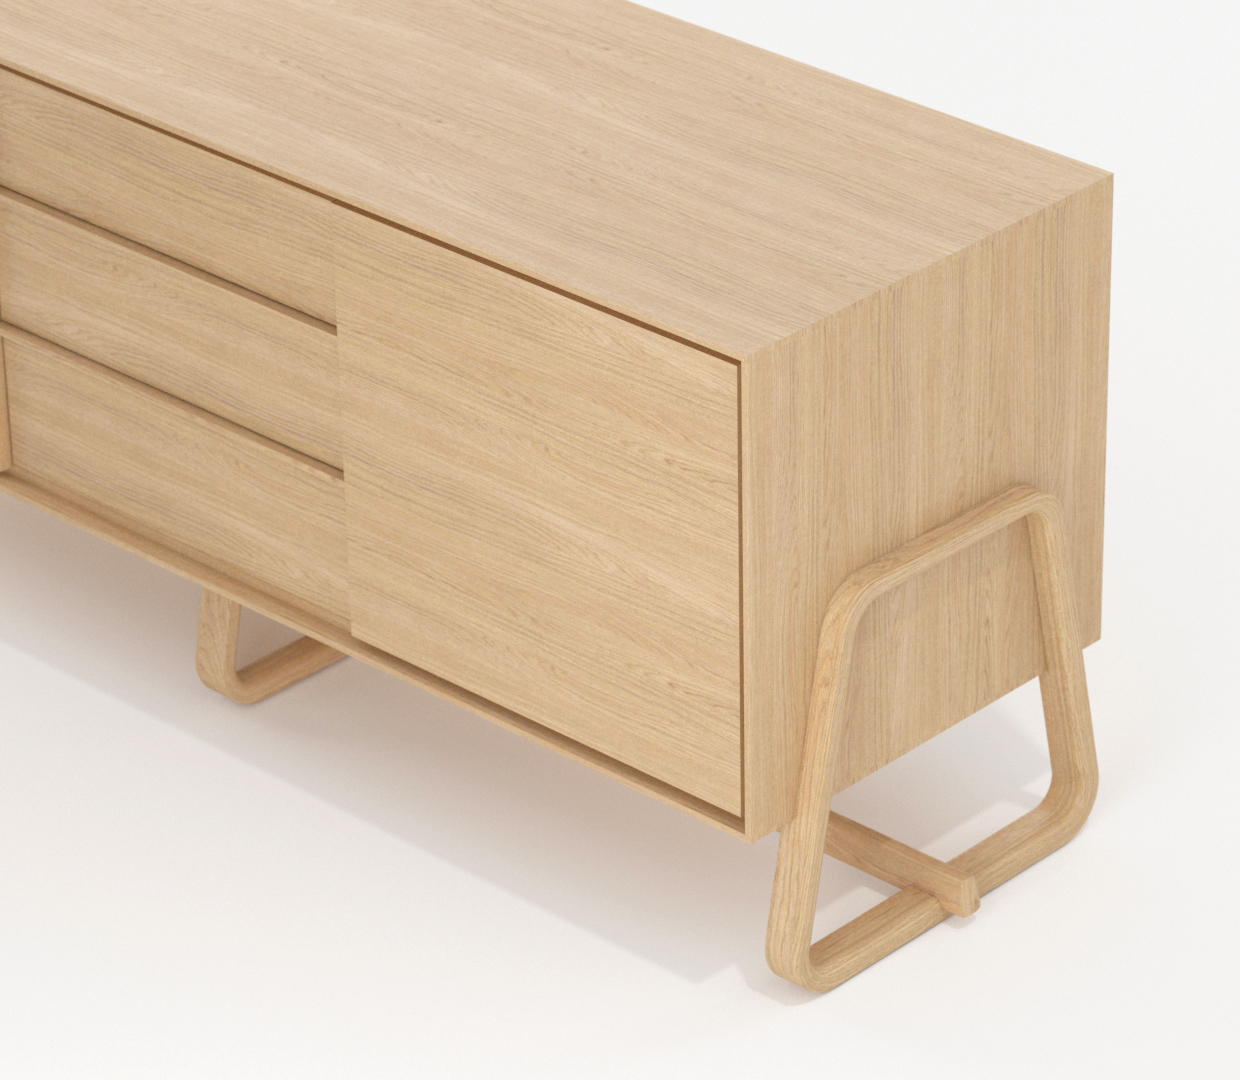 Theo Office Credenza in natural oak